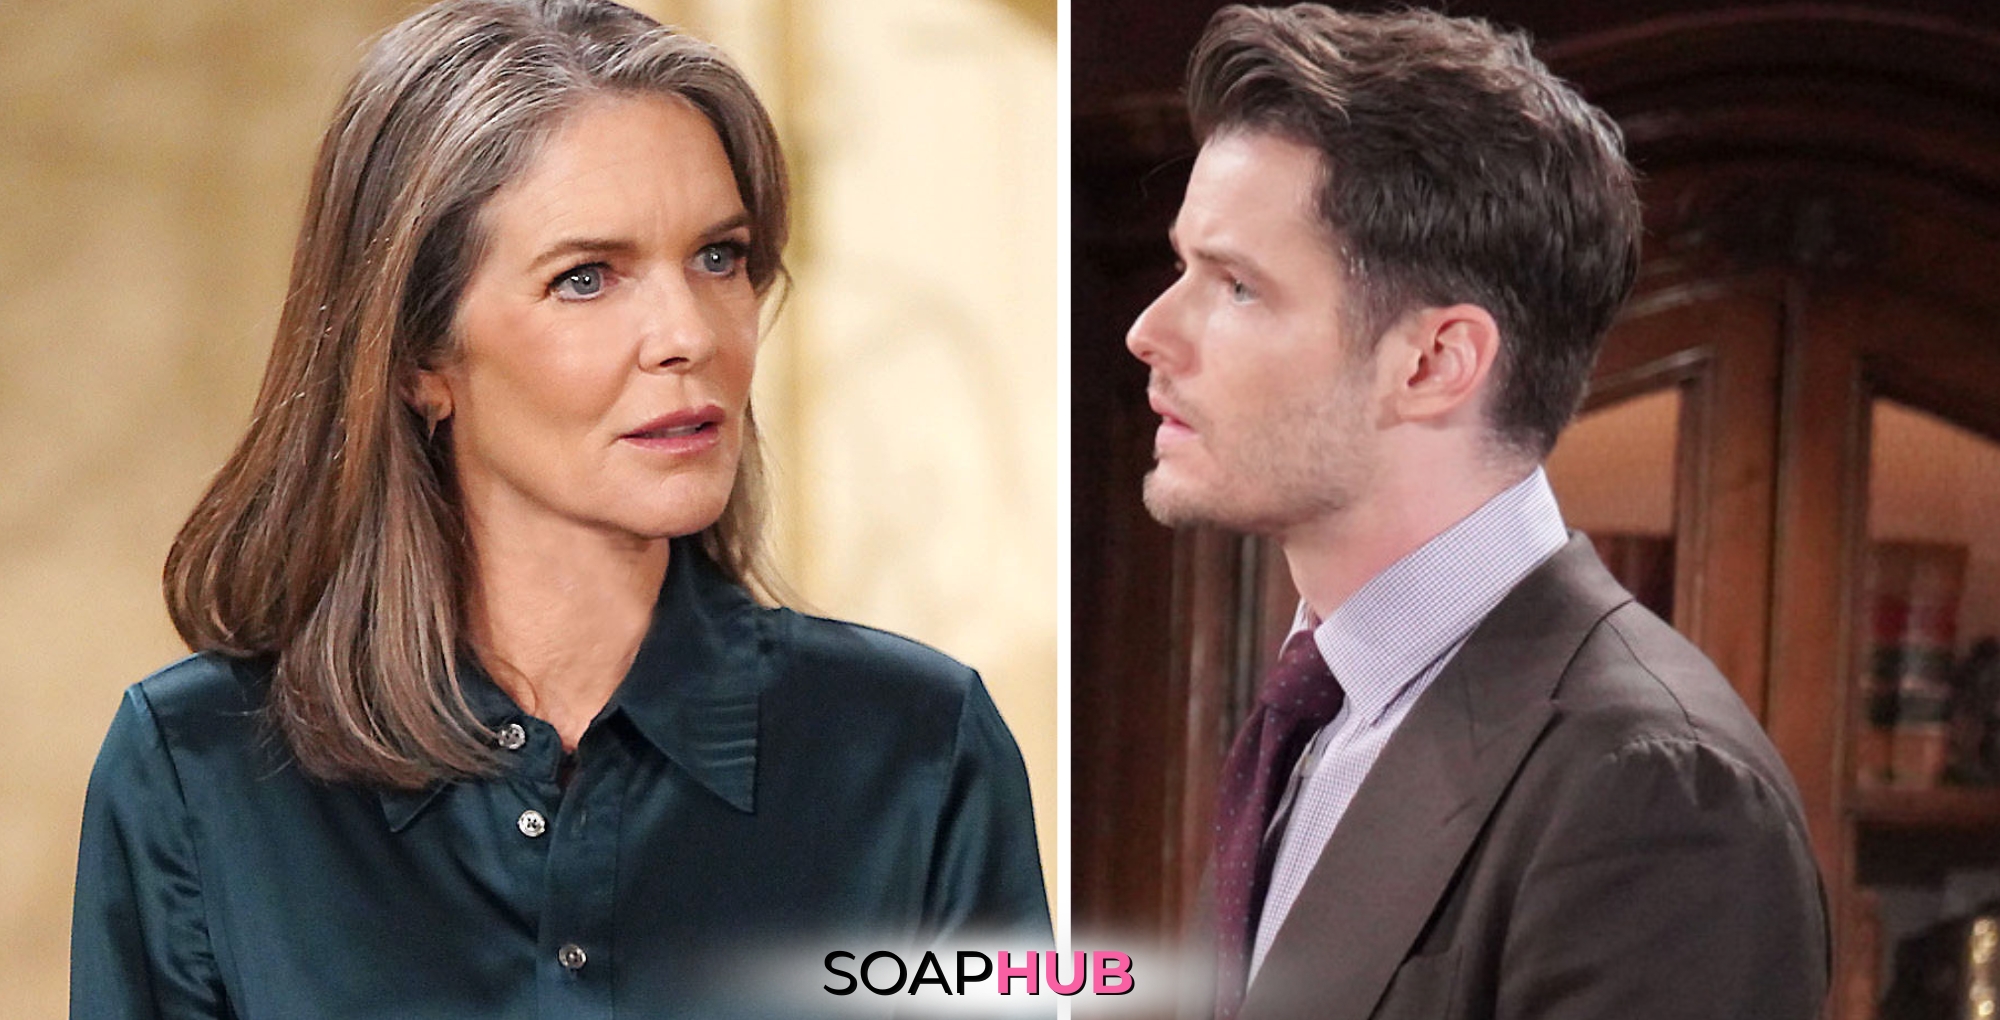 The Young and the Restless spoilers for Thursday, March 28 feature Diane and Kyle with the Soap Hub logo across the bottom.